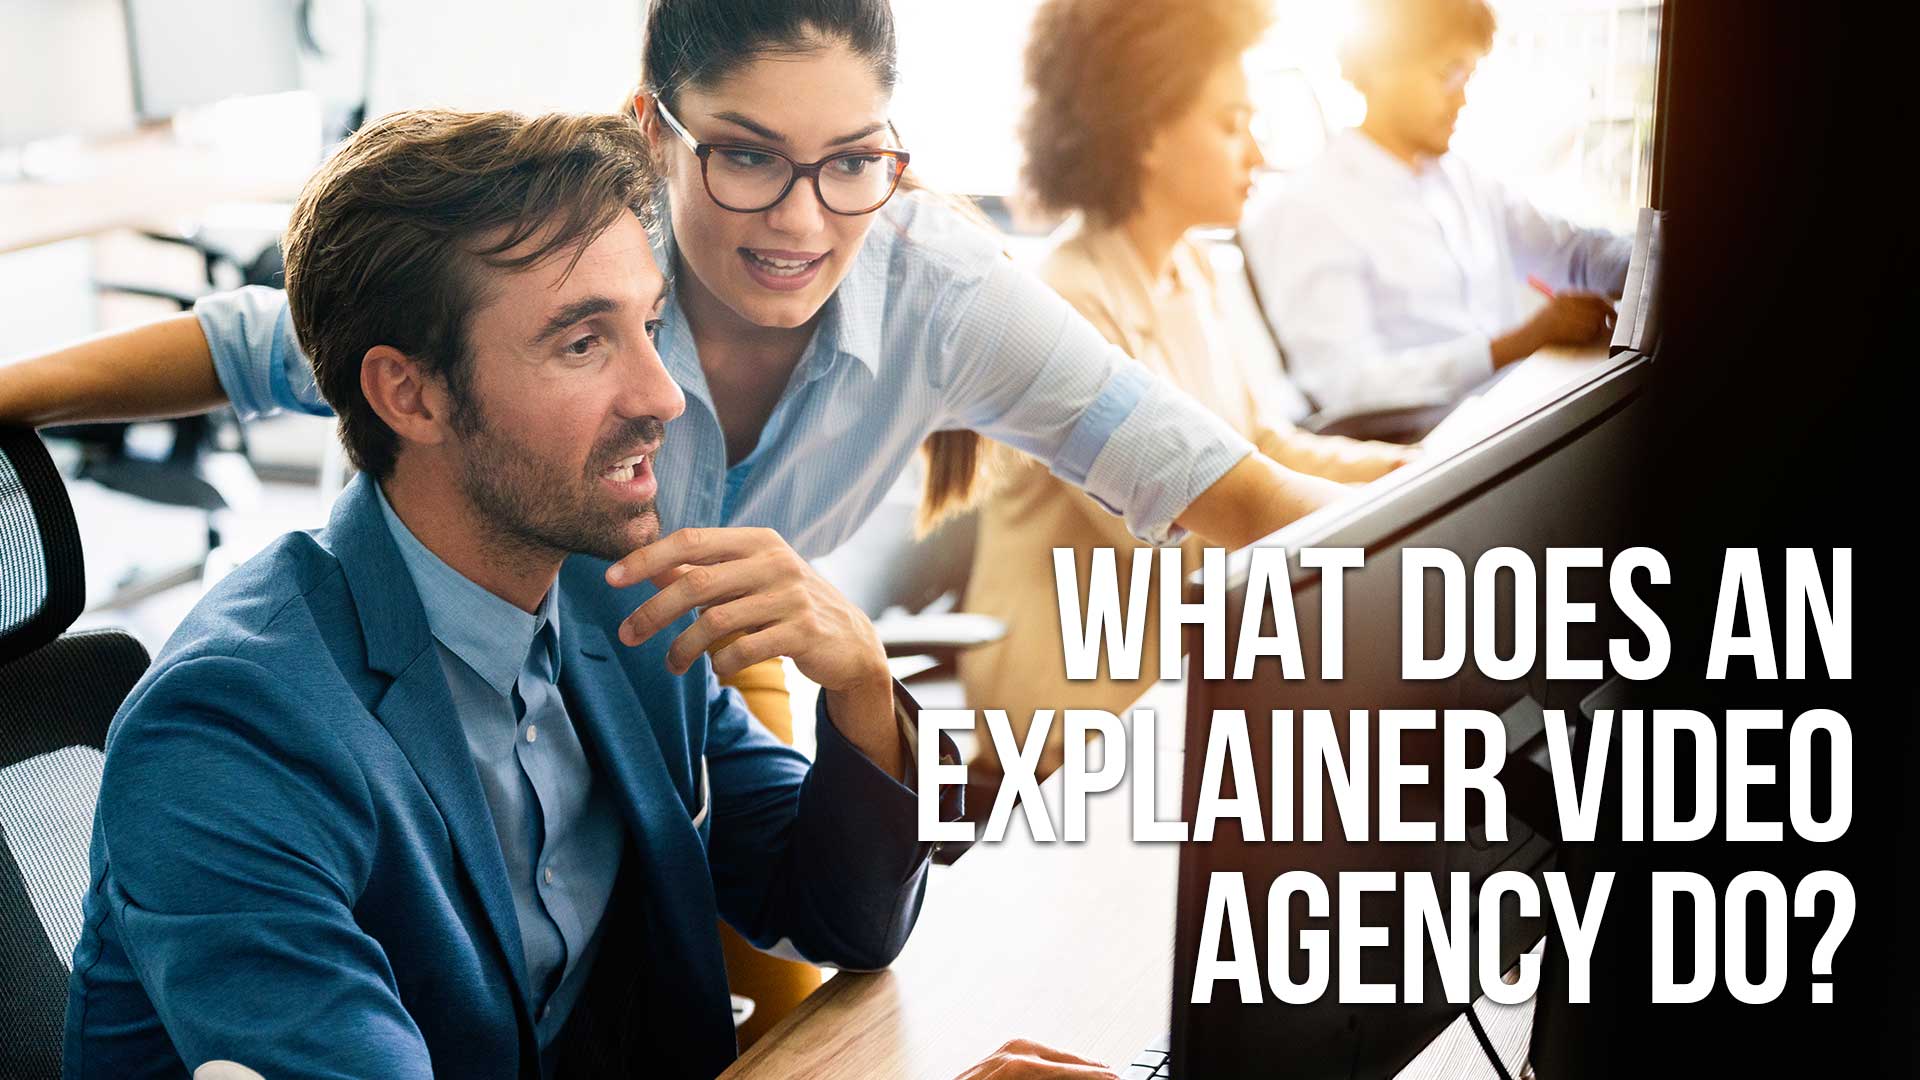 What Does an Explainer Video Agency Do?